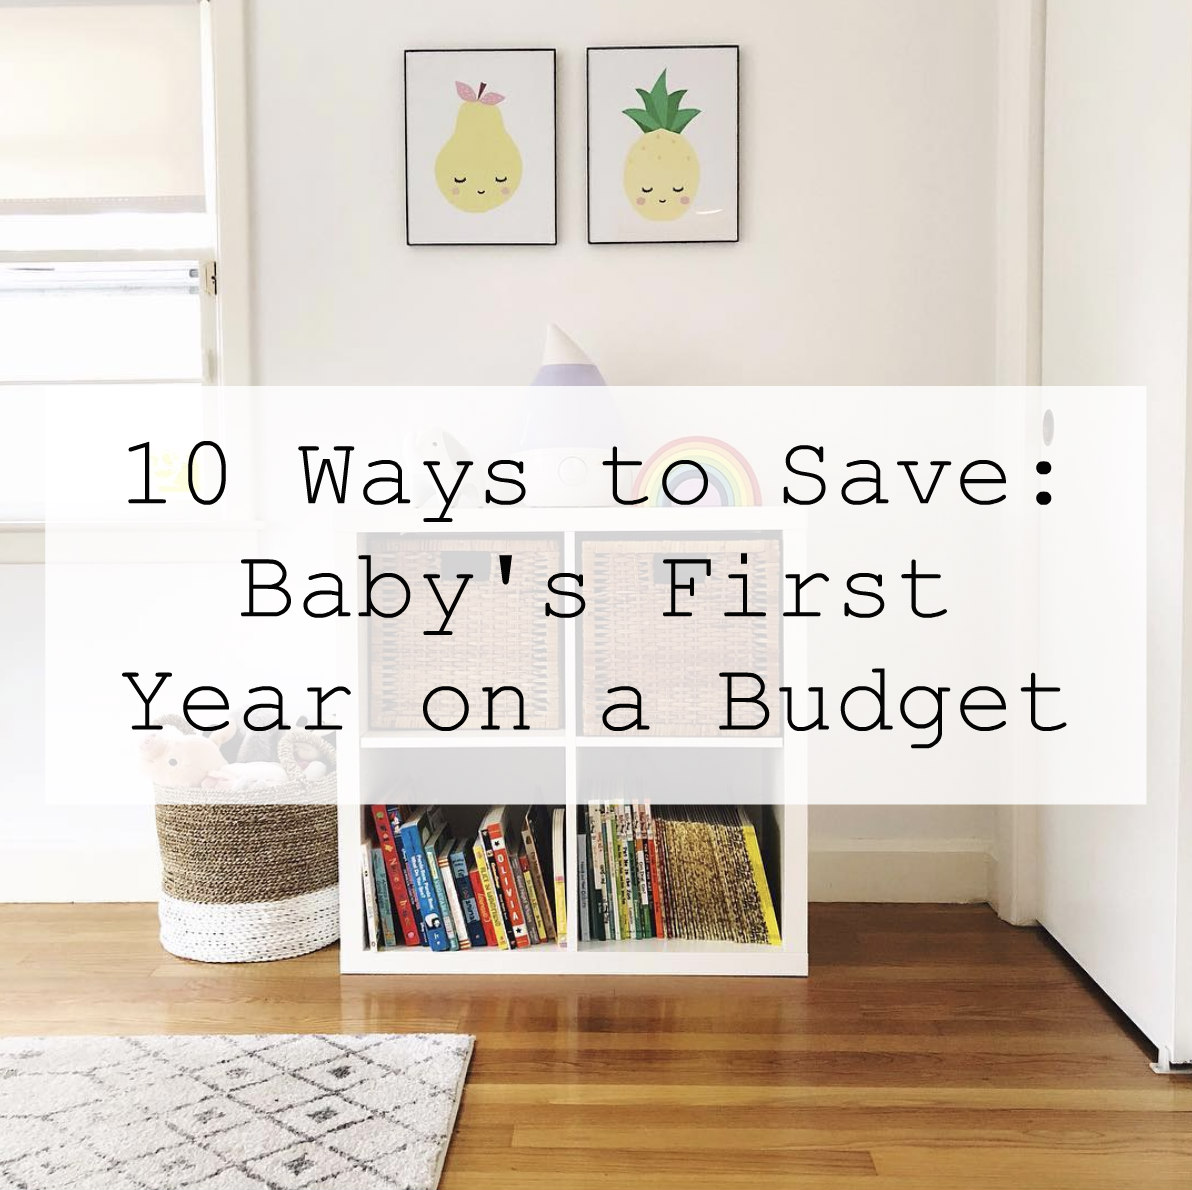 10 Ways to Save: Baby's First Year on a Budget